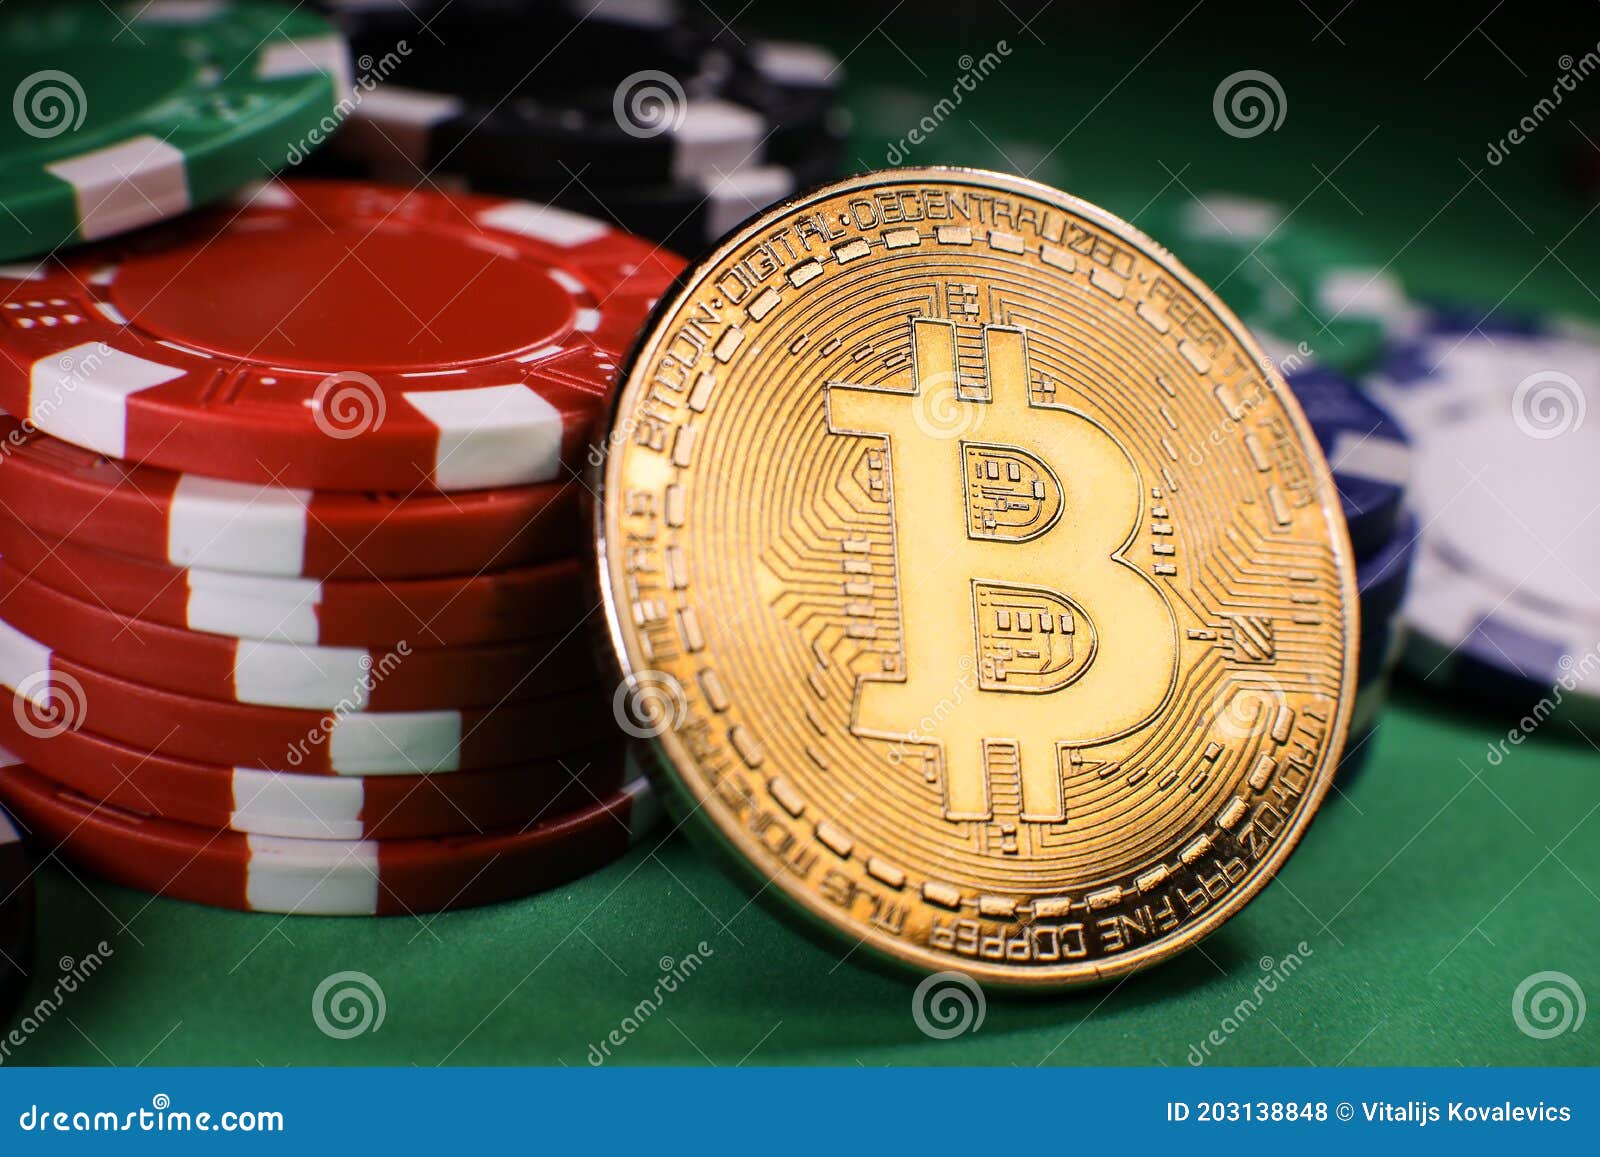 bitcoin casino game? It's Easy If You Do It Smart